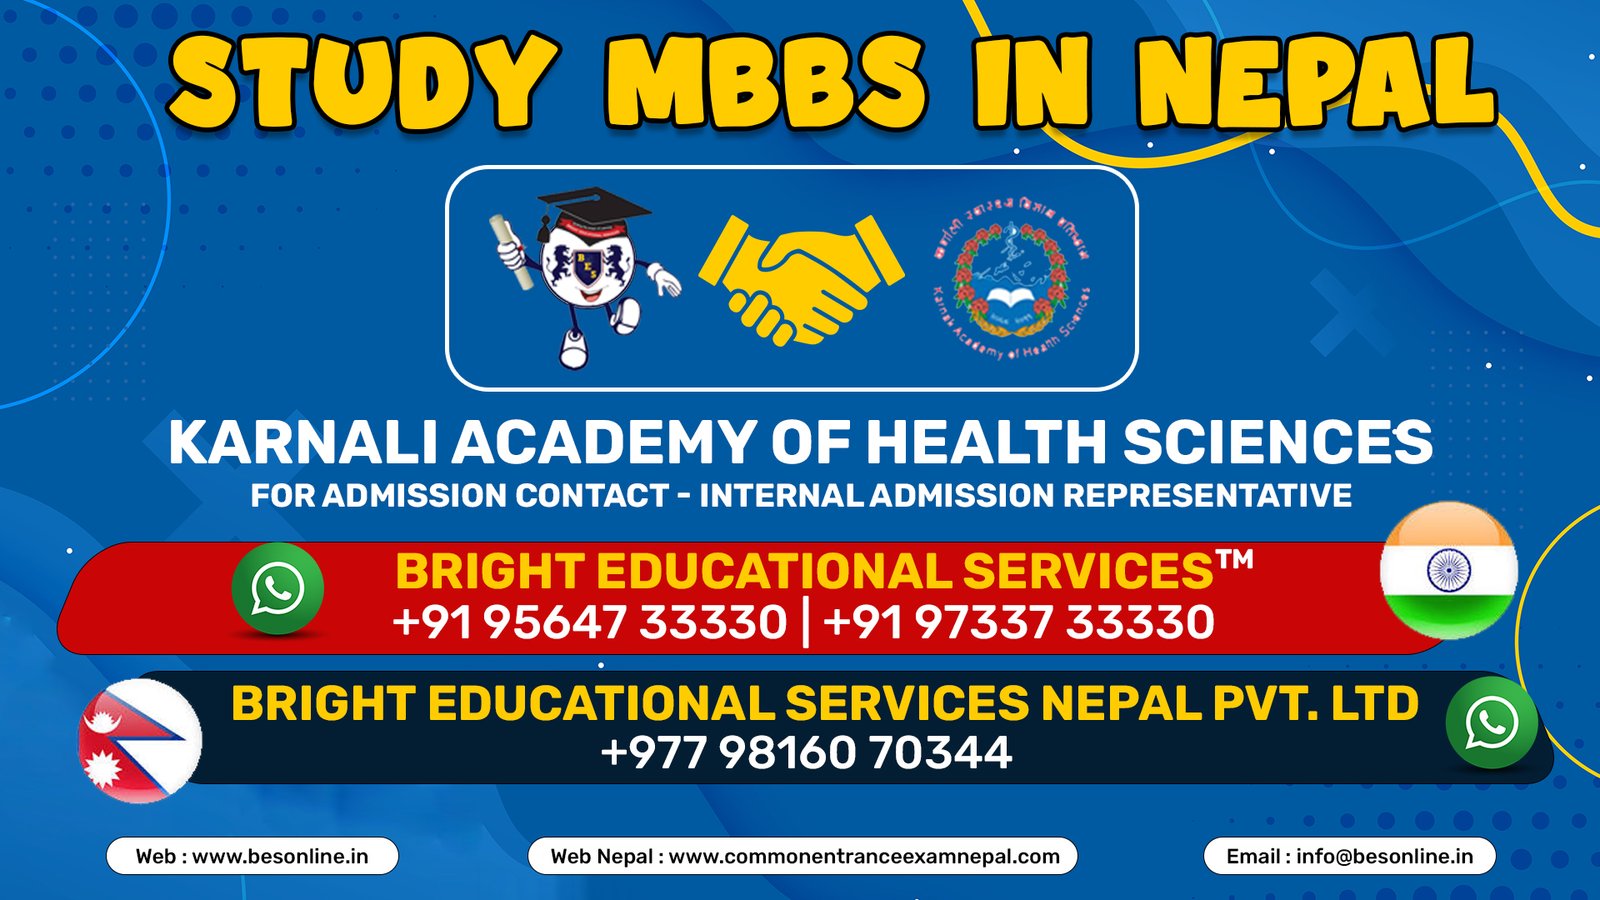 study-mbbs-in-nepal-at-karnali-academy-of-health-sciences-in-2023